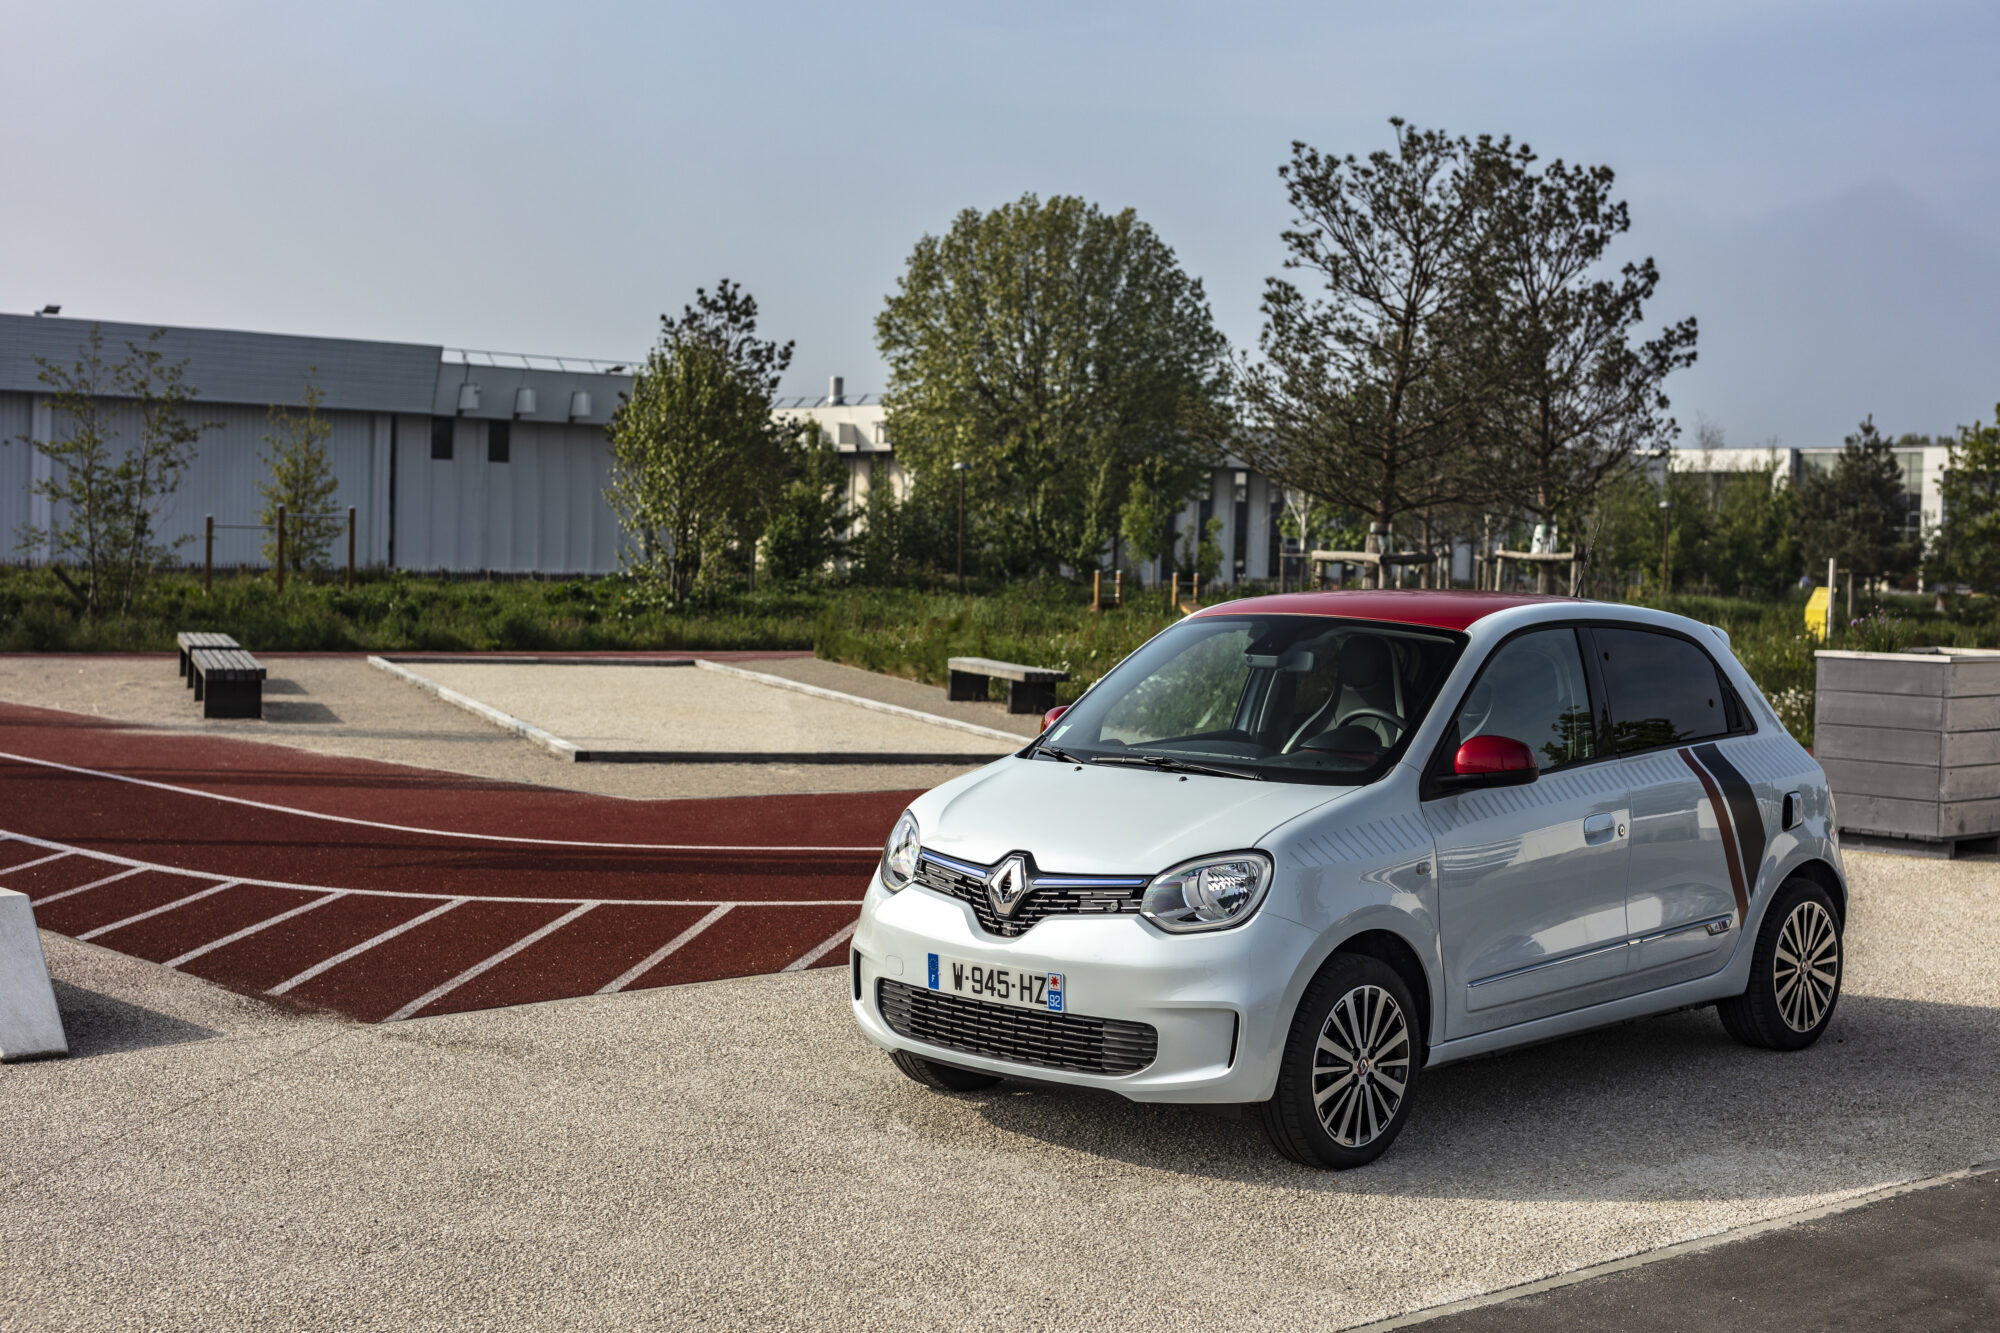 2019 - New Renault TWINGO Le Coq Sportif Limited Edition